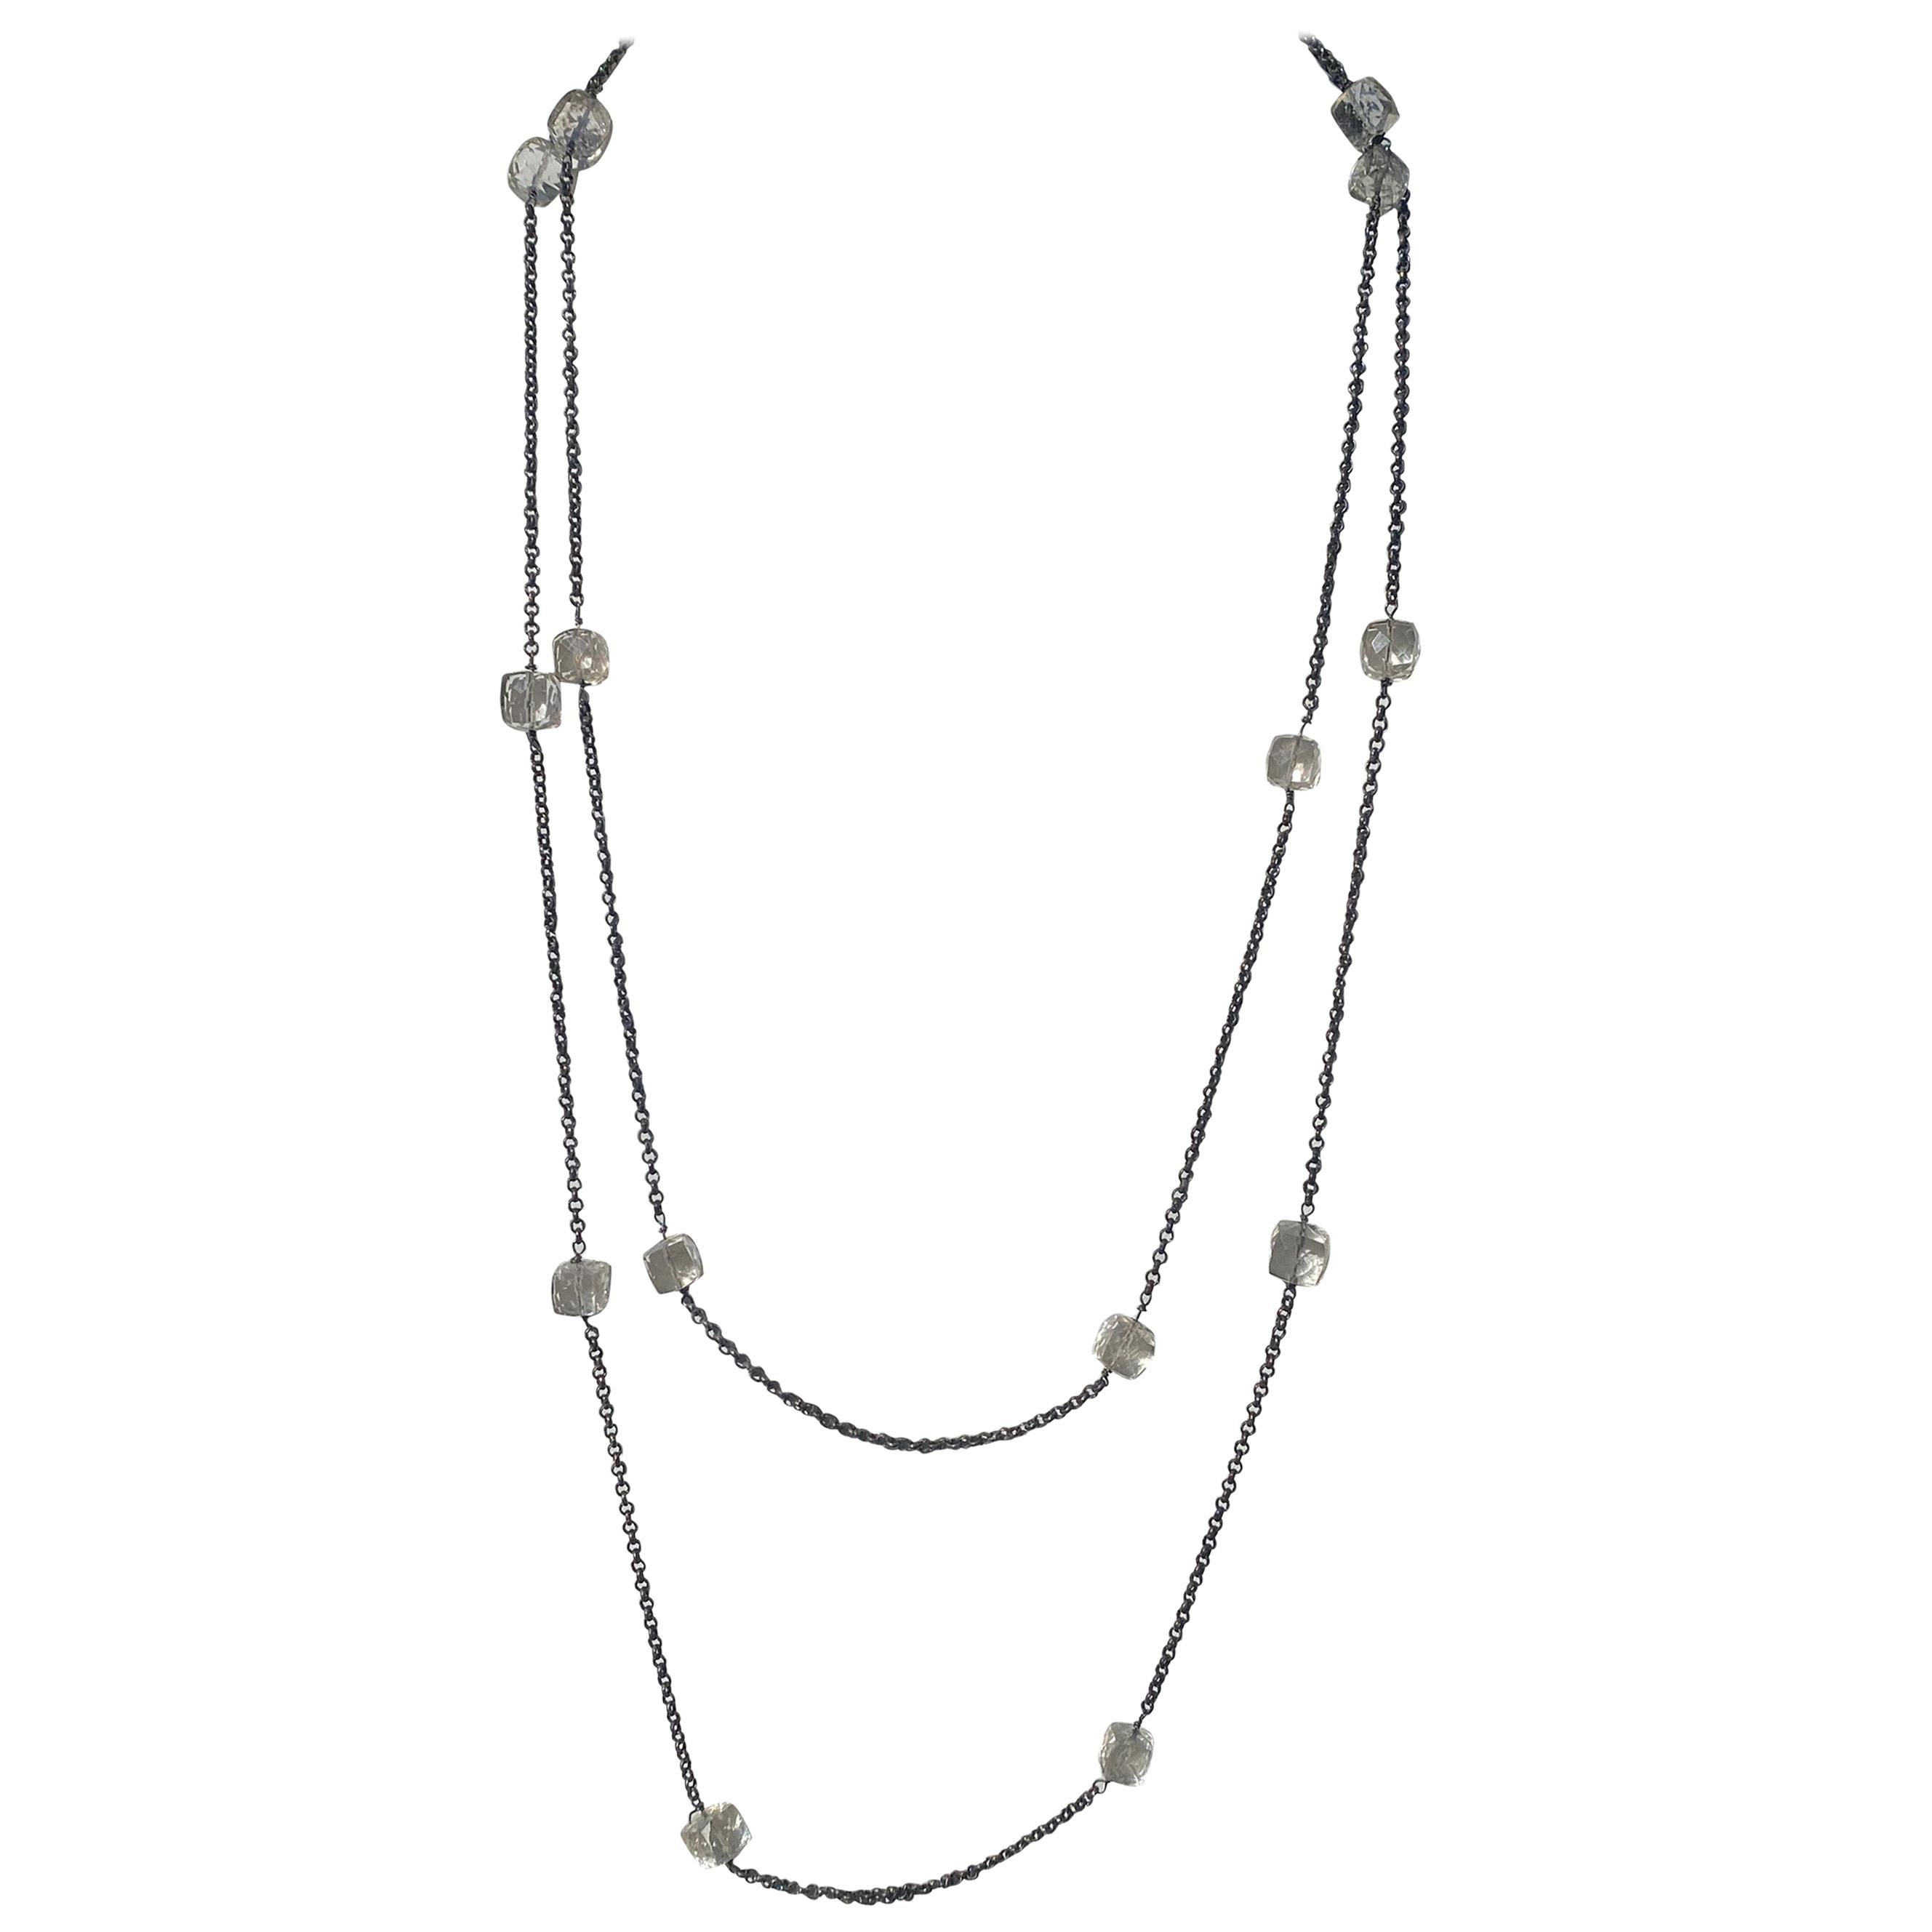 1920 Styled Oxidized Sterling Silver and Quartz Cubed Long Necklace For Sale